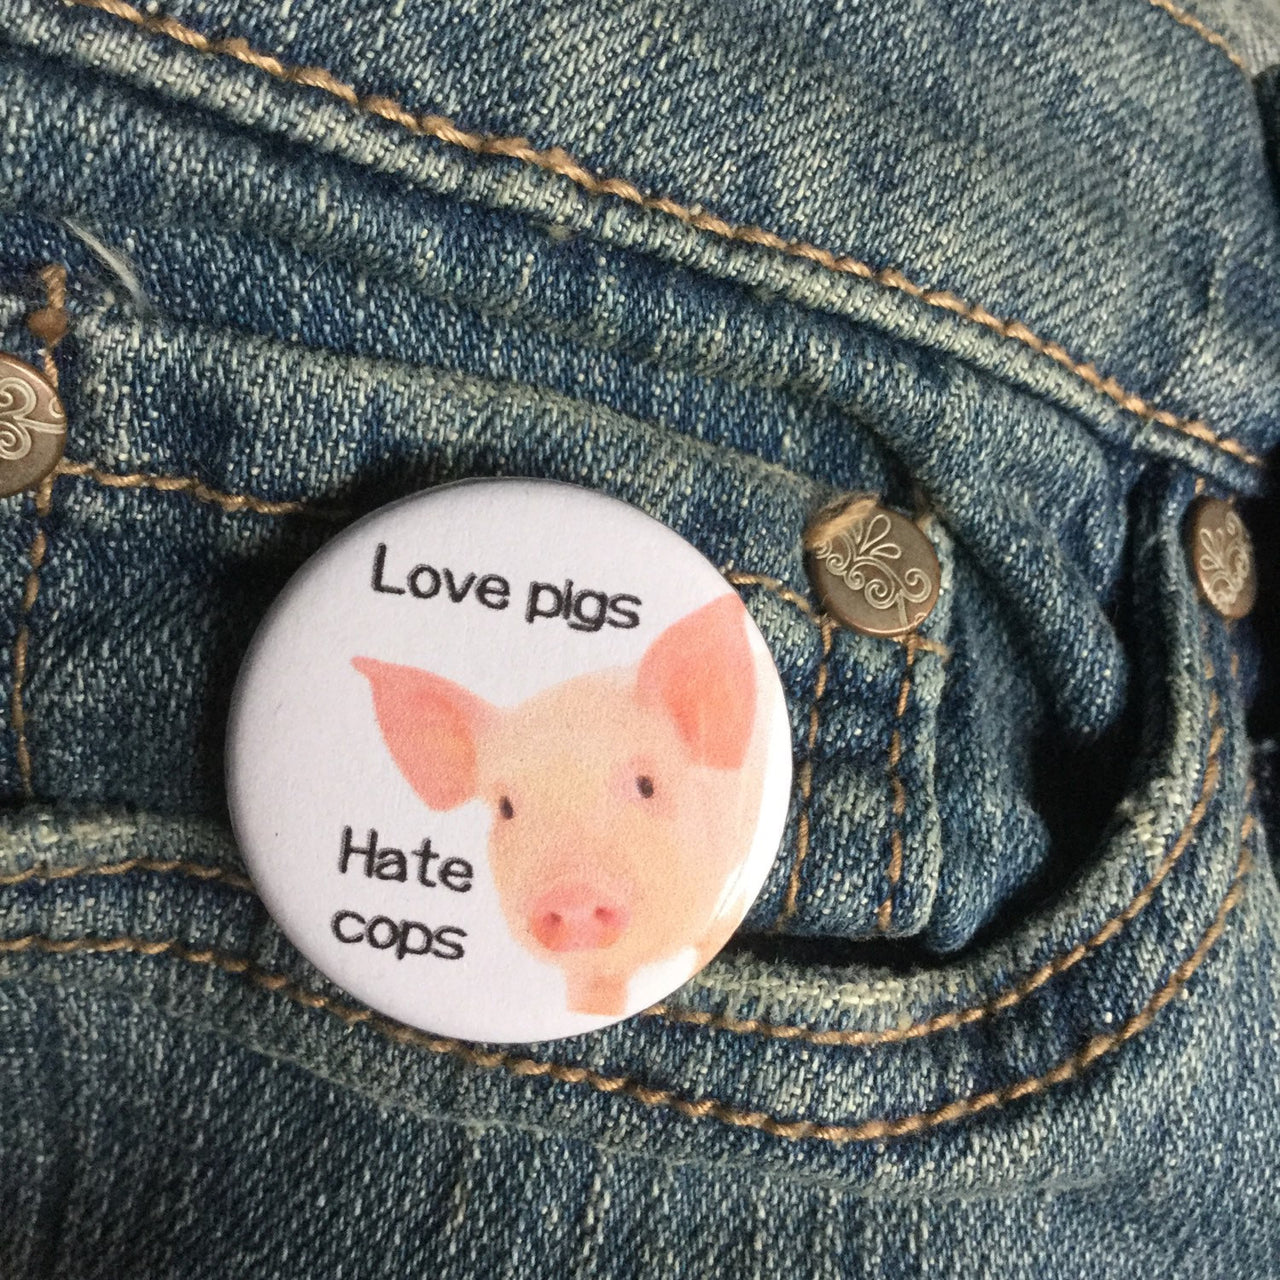 Love pigs Hate cops - Radical Buttons